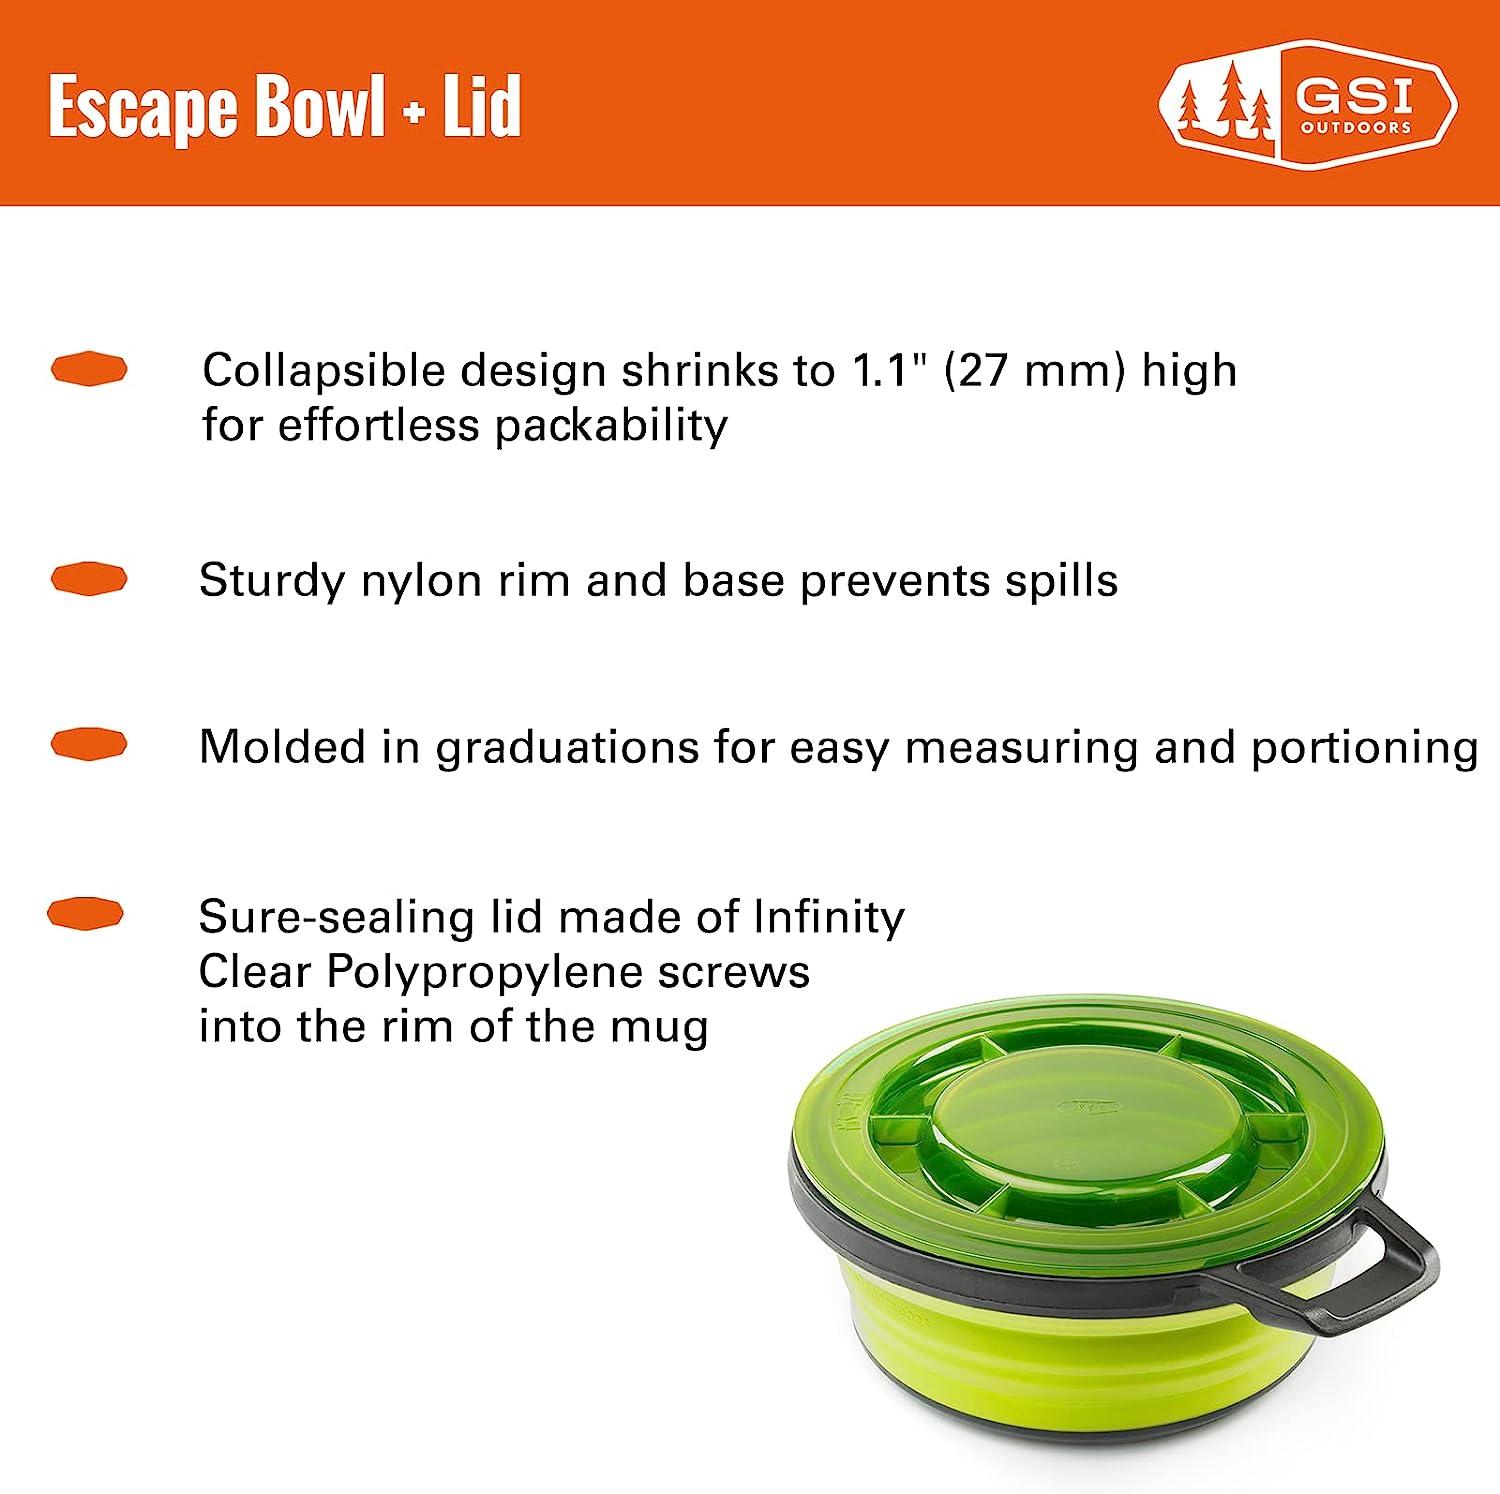 GSI Outdoors 22oz. Escape Bowl and Lid, Flat-Folding Insulating